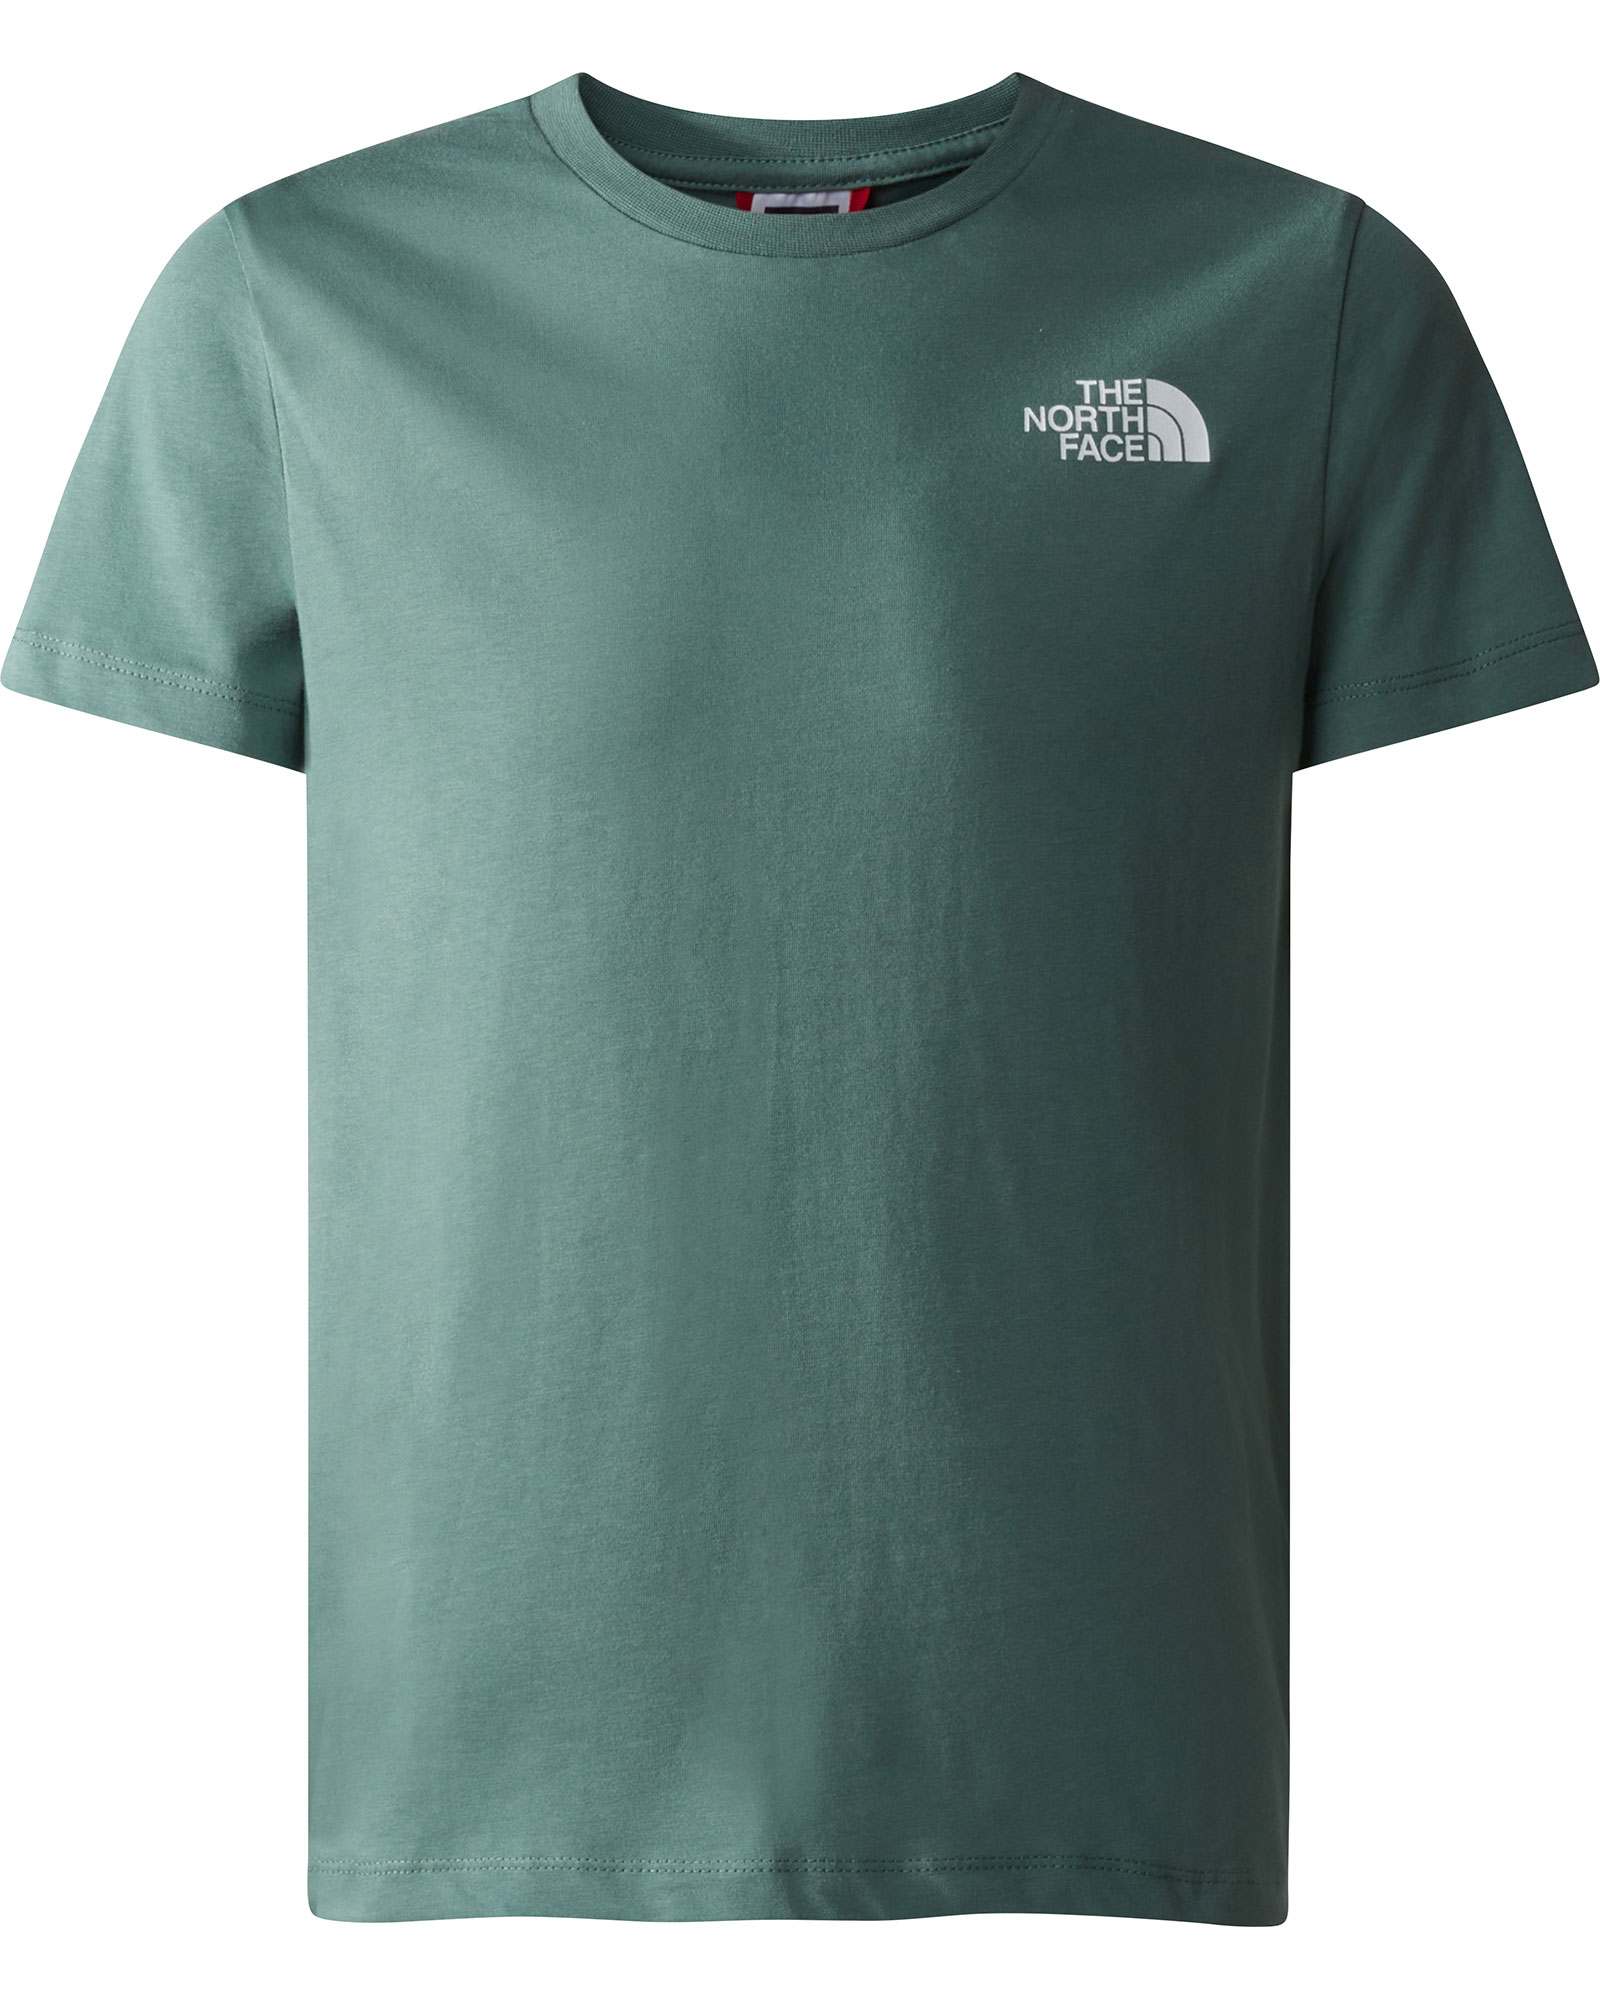 The North Face Youth Simple Dome T Shirt XL - Dark Sage XL